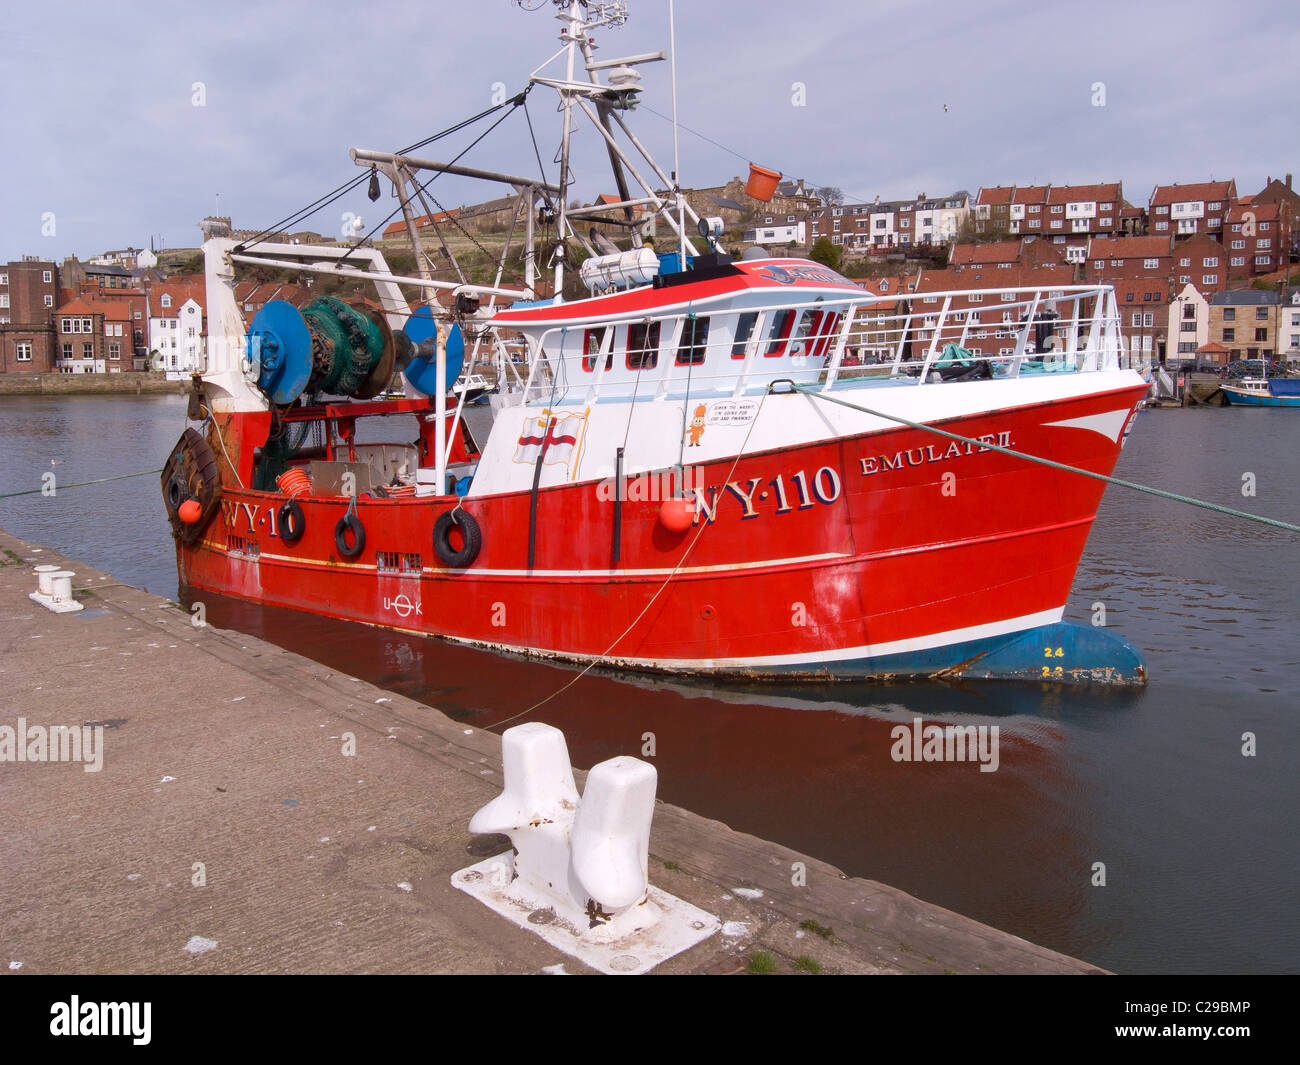 Red fishing boat 'Emulate ll' at Endeavour quay Whitby, North Yorkshire. Stock Photo